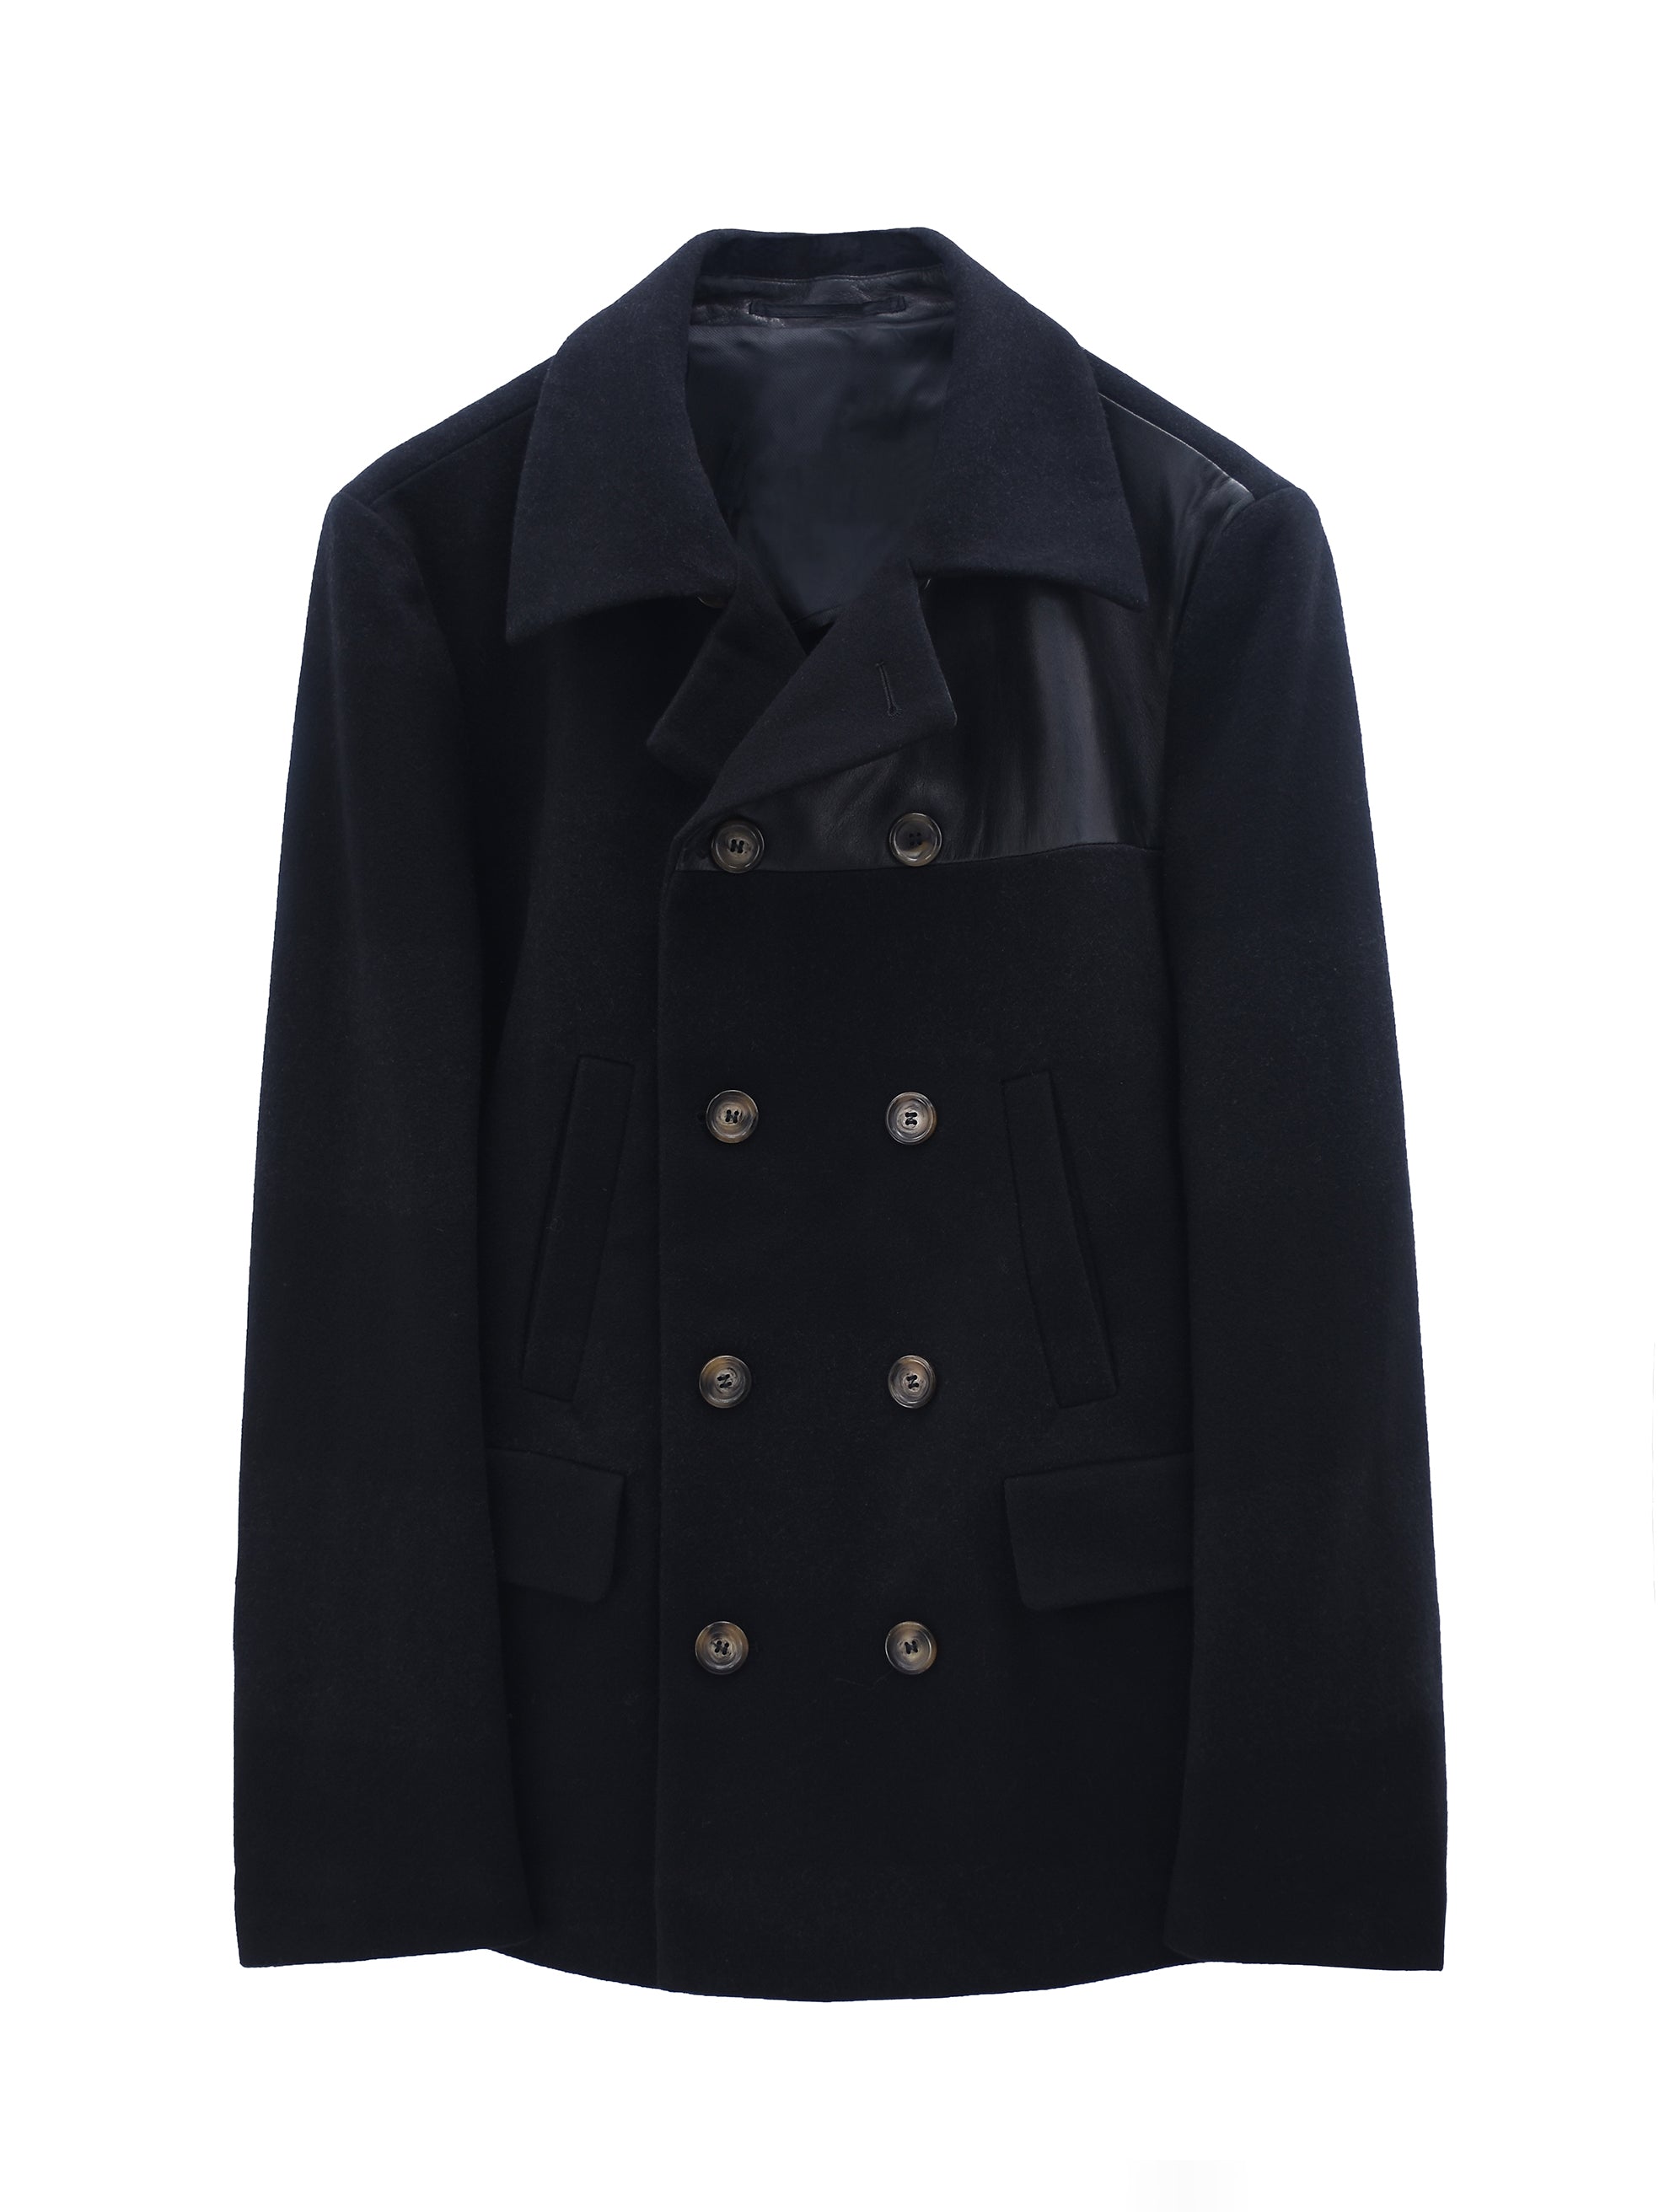 THE TUBE BLACK COAT WITH PAPER LEATHER DETAILING